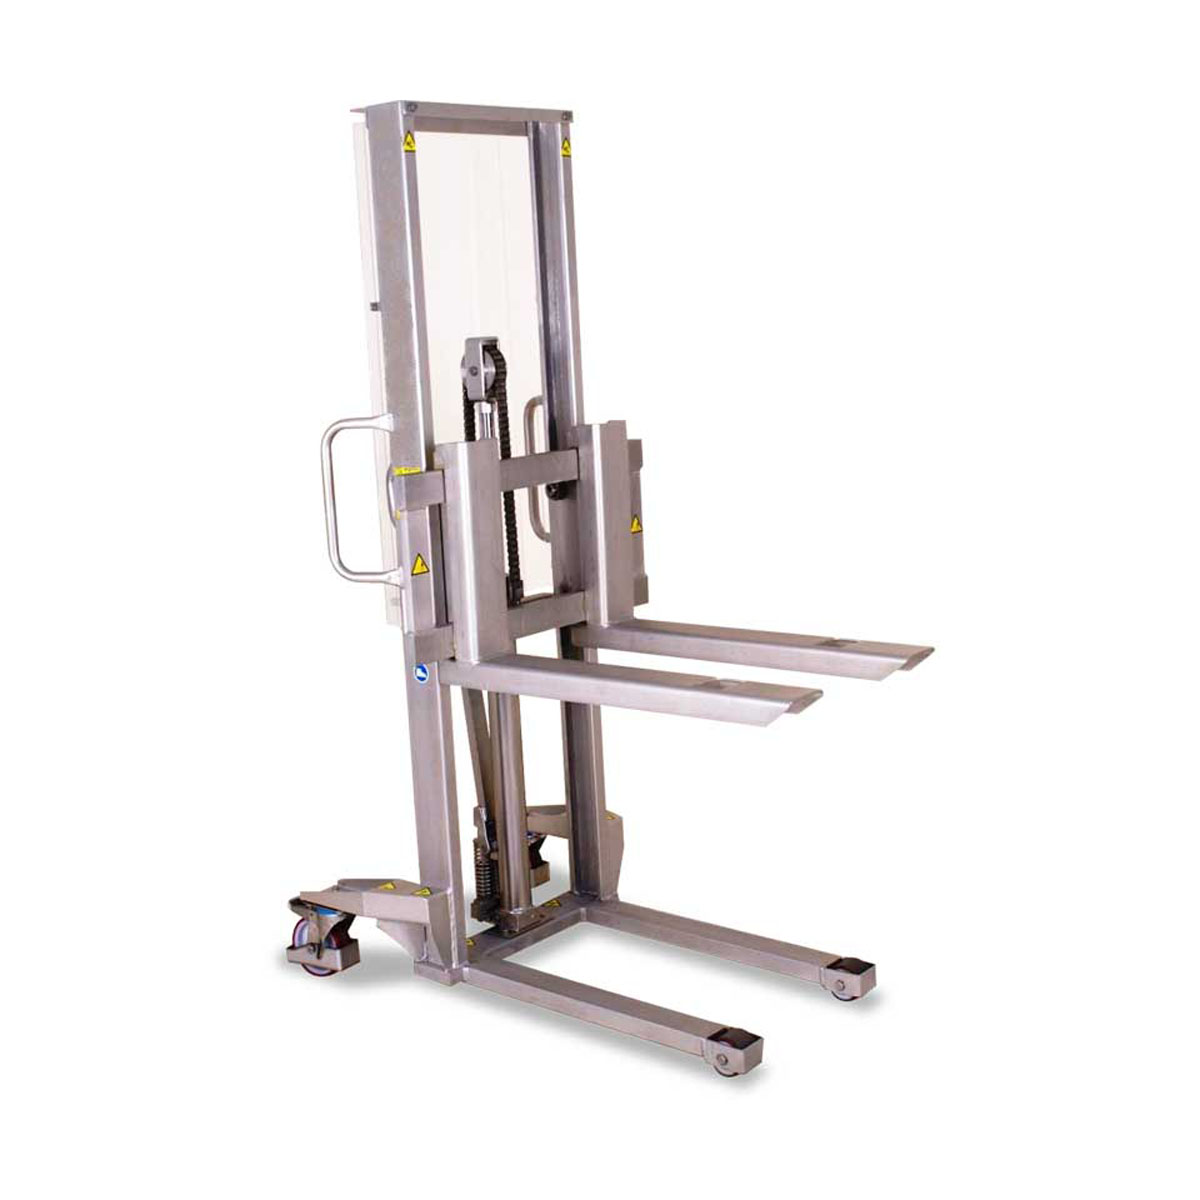 Buy Pallet Stacker (Stainless Steel) in Pallet Stackers from Armanni available at Astrolift NZ